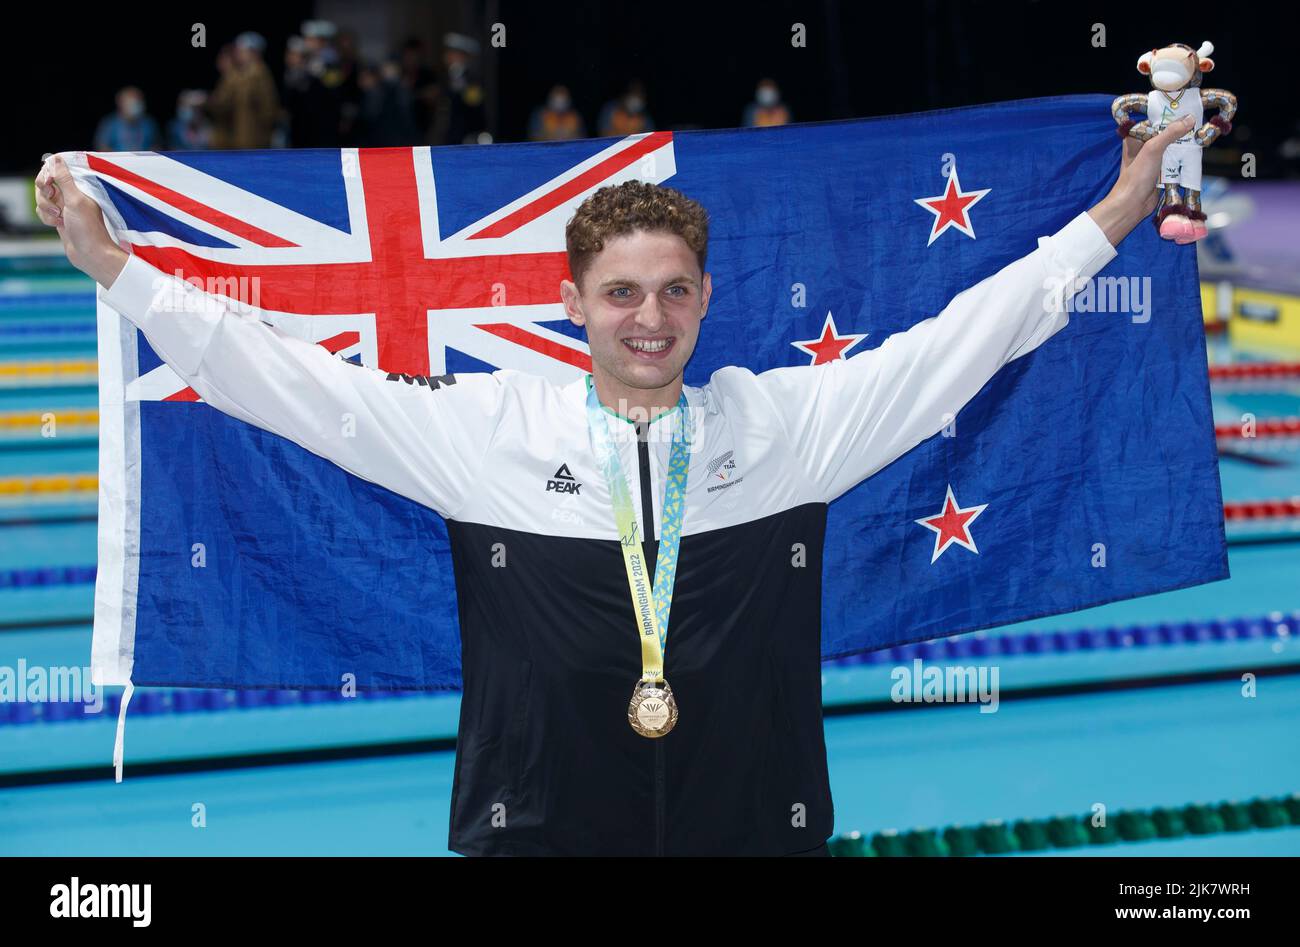 Birmingham, UK. 31st July 2022; Sandwell Aquatics Centre, Birmingham, Midlands, England: Day 3 of the 2022 Commonwealth Games: Lewis Clareburt (NZL) with his Gold Medal and national flag after winning the Men's 200m Butterfly Final Credit: Action Plus Sports Images/Alamy Live News Stock Photo